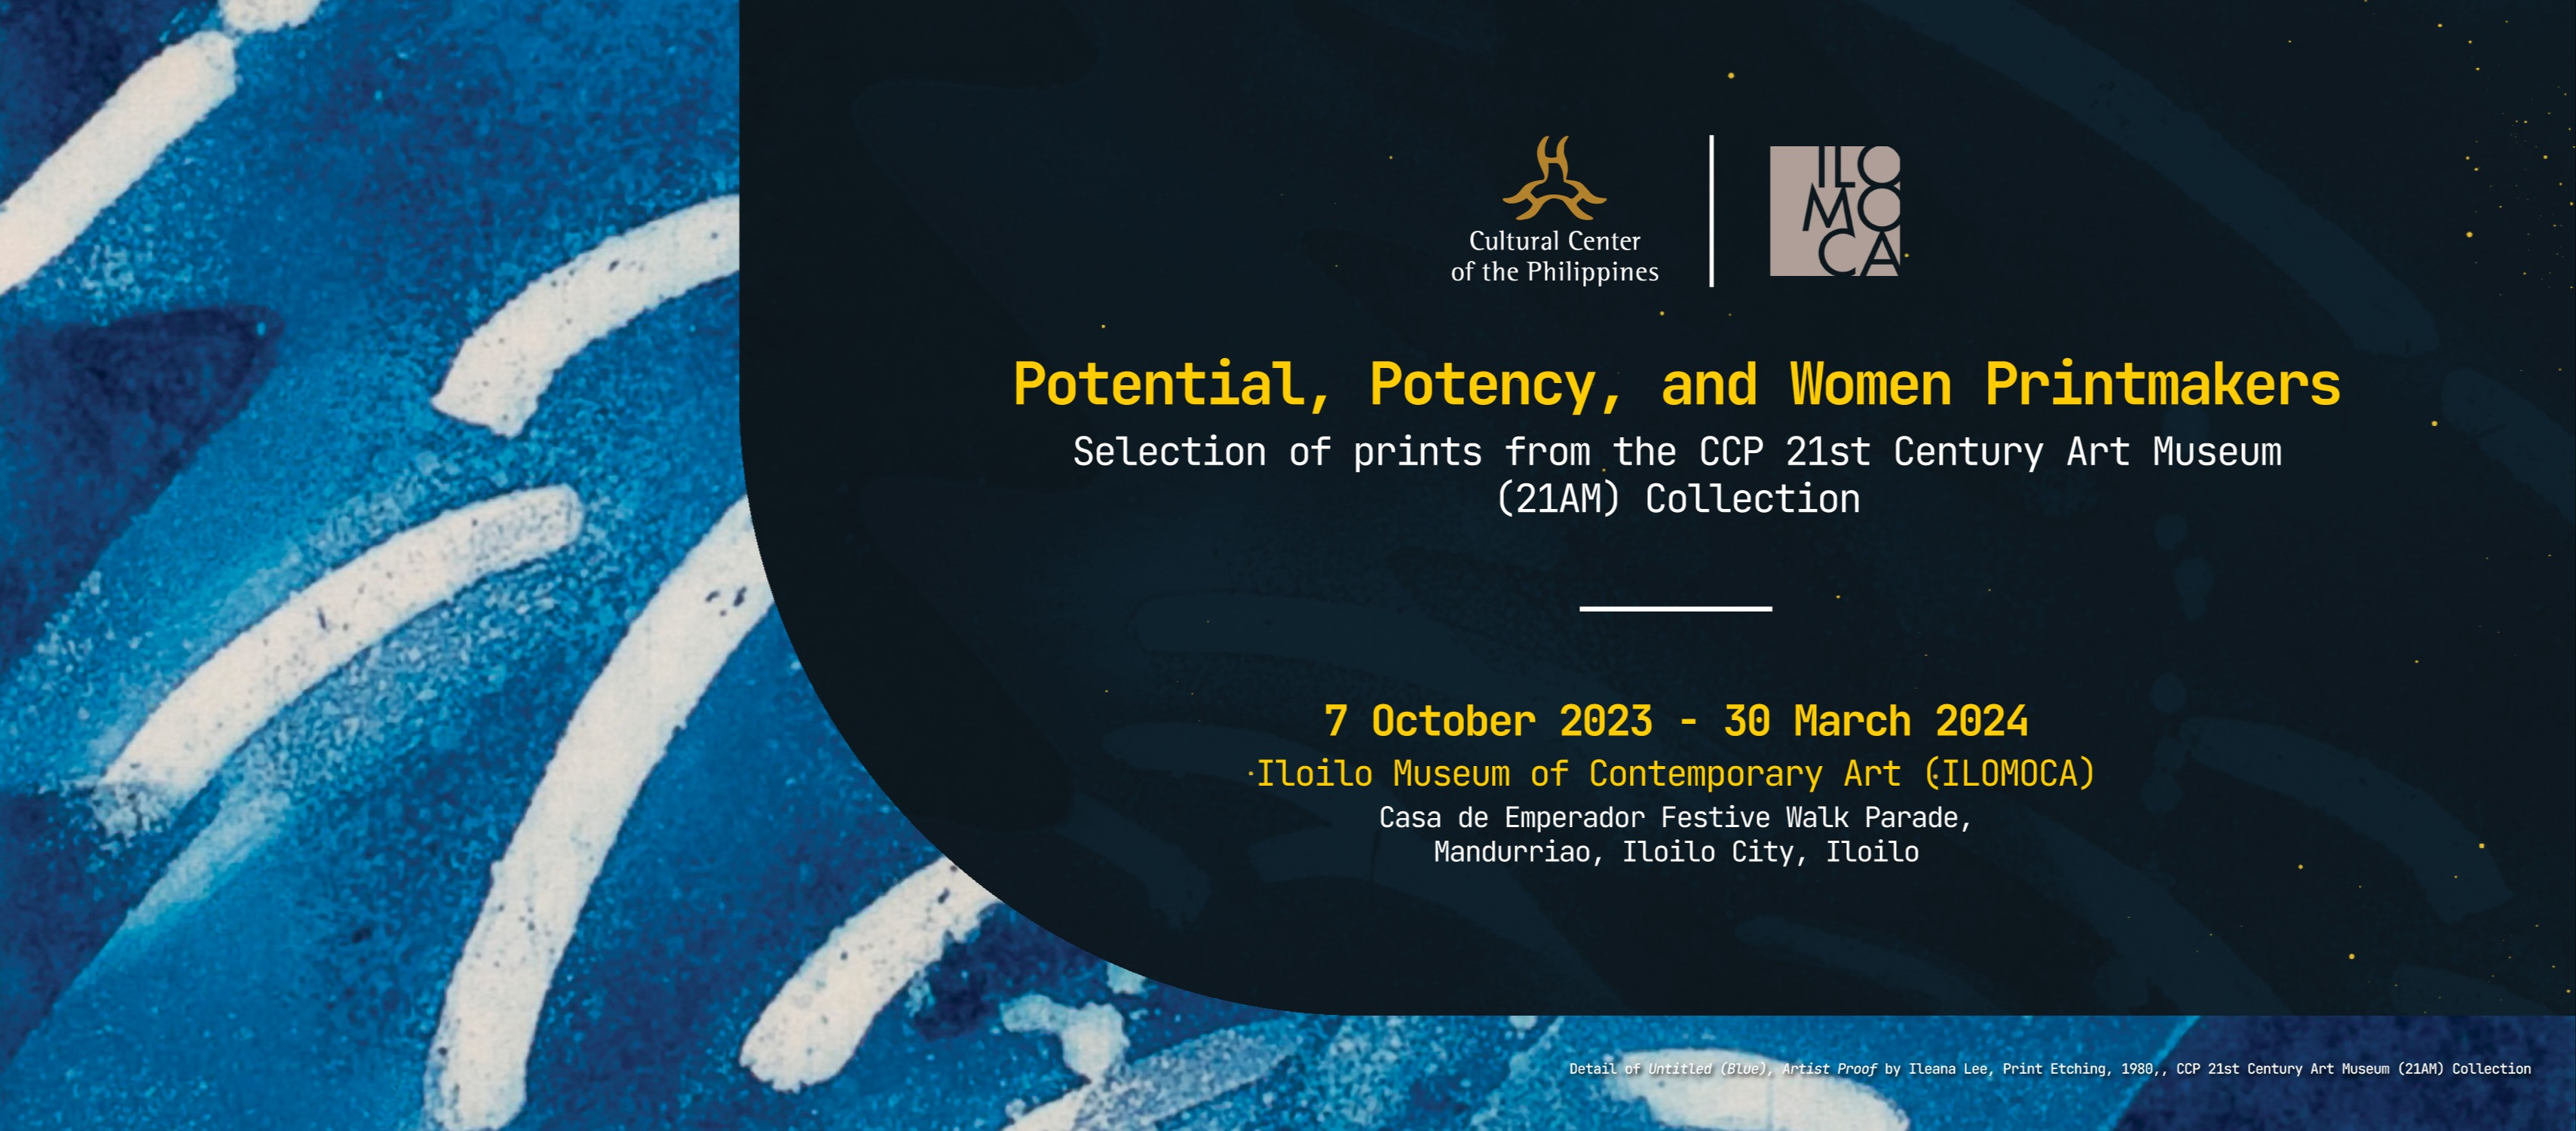 Potential, Potency, and Women Printmakers: Selection of prints from the CCP 21st Century Art Museum (21AM) Collection